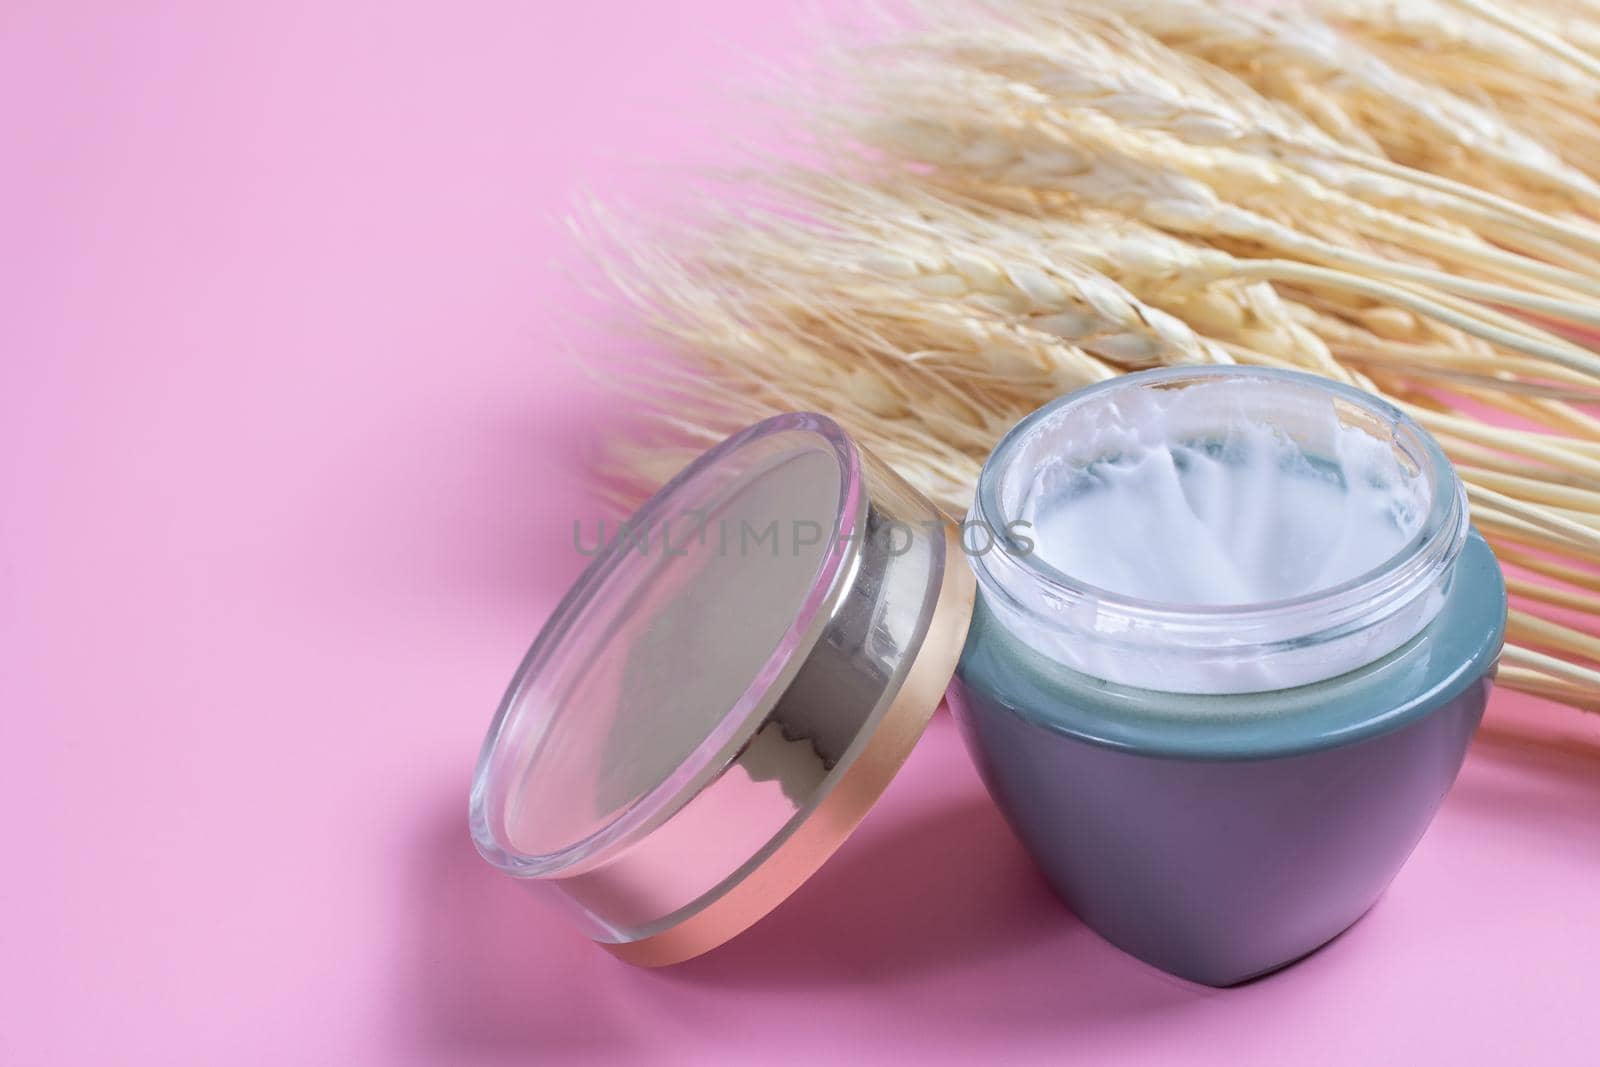 Natural cosmetics made from wheat and barley. by bySergPo